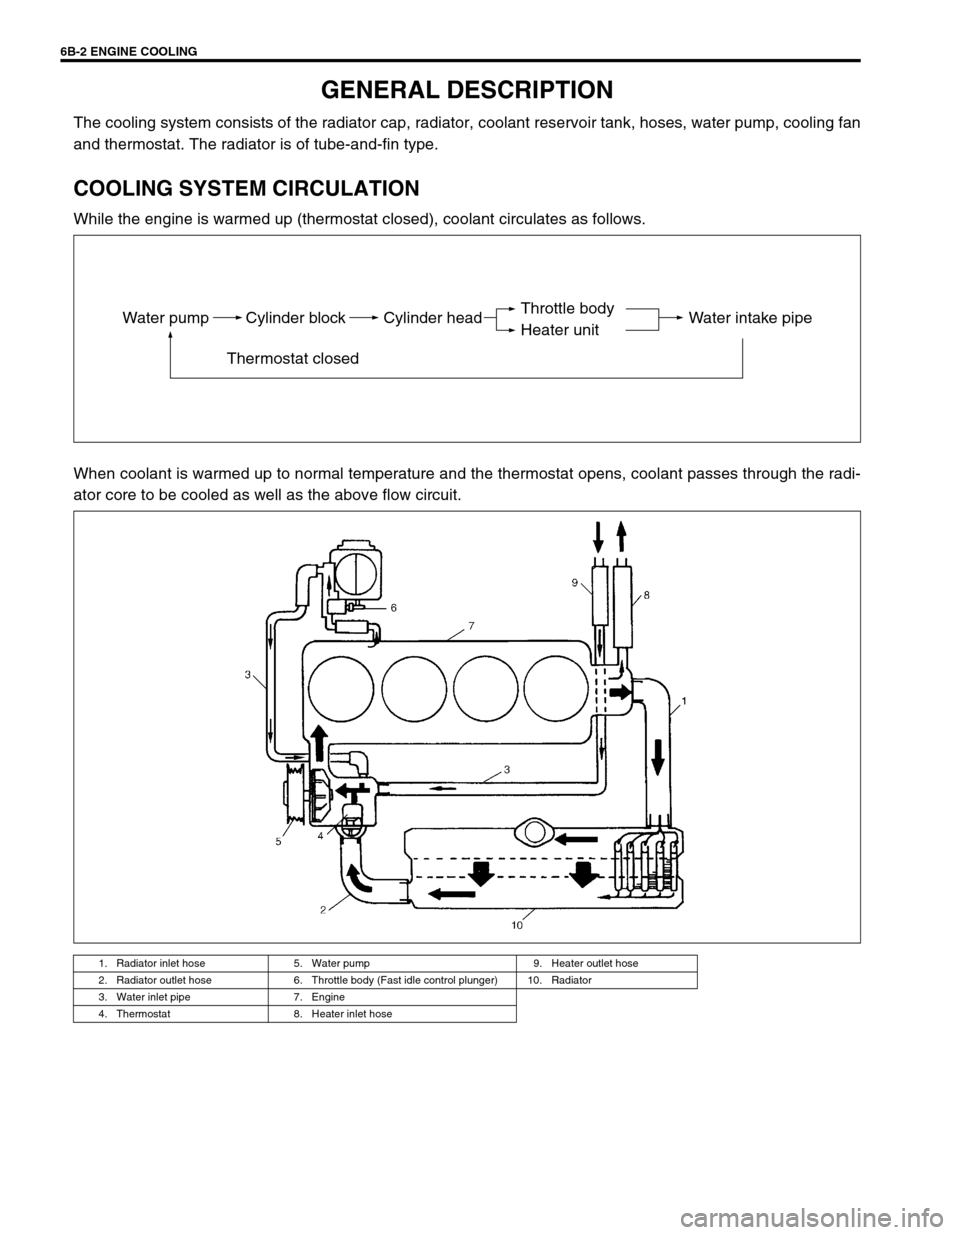 SUZUKI SWIFT 2000 1.G RG413 Service Service Manual 6B-2 ENGINE COOLING
GENERAL DESCRIPTION
The cooling system consists of the radiator cap, radiator, coolant reservoir tank, hoses, water pump, cooling fan
and thermostat. The radiator is of tube-and-fi